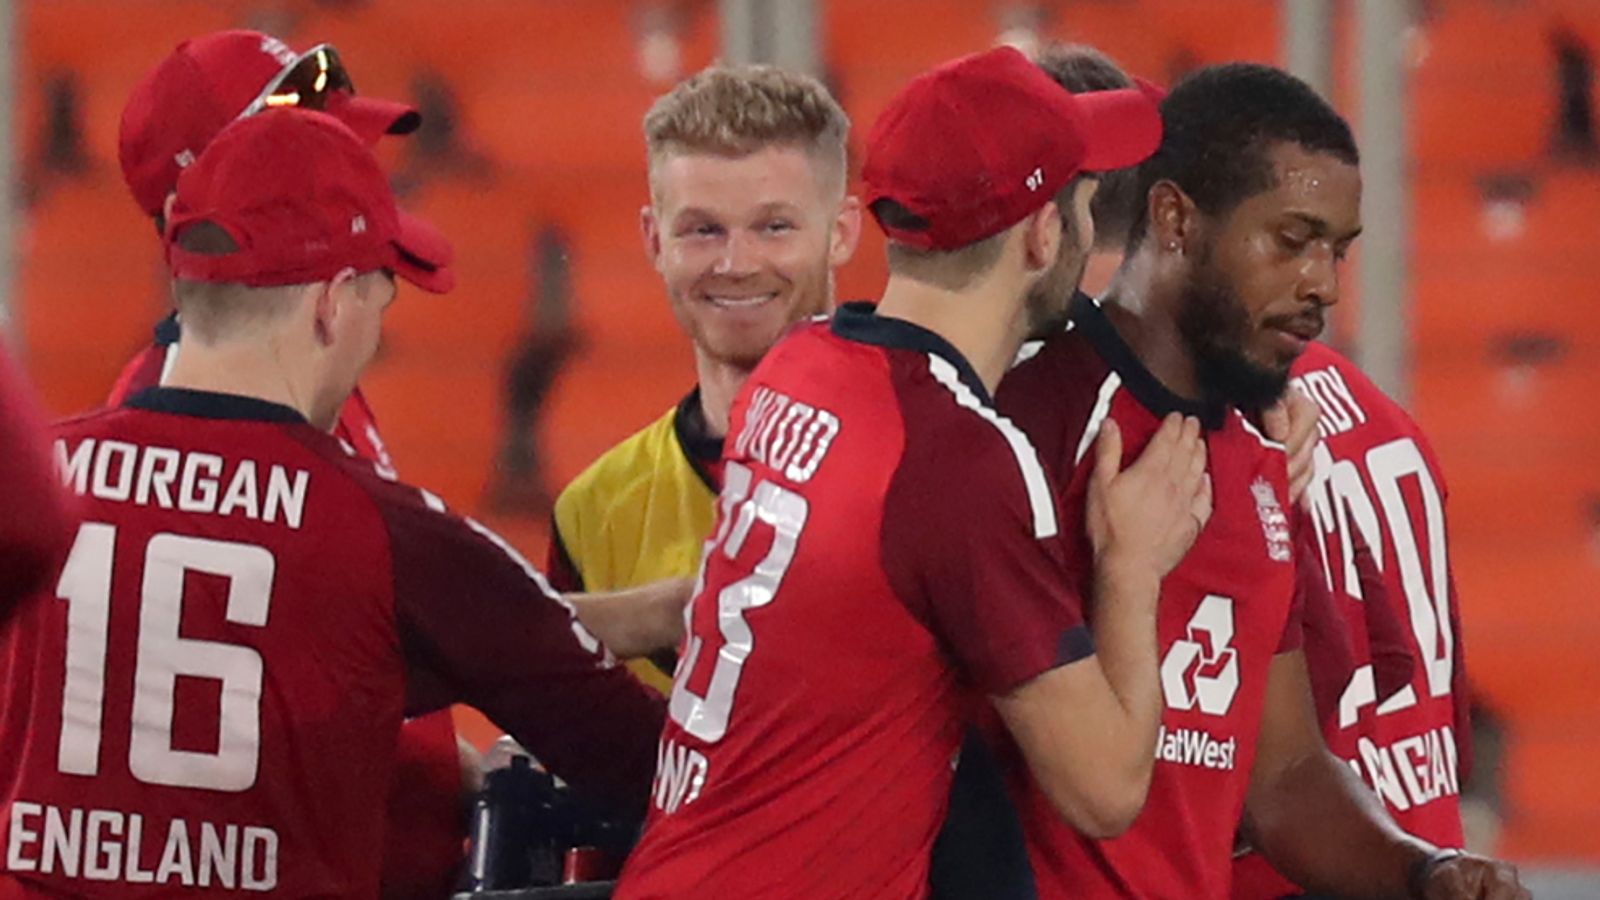 Chris Jordan from England said he was ‘out of this world’ after taking part in a T20 border capture against India |  Cricket News